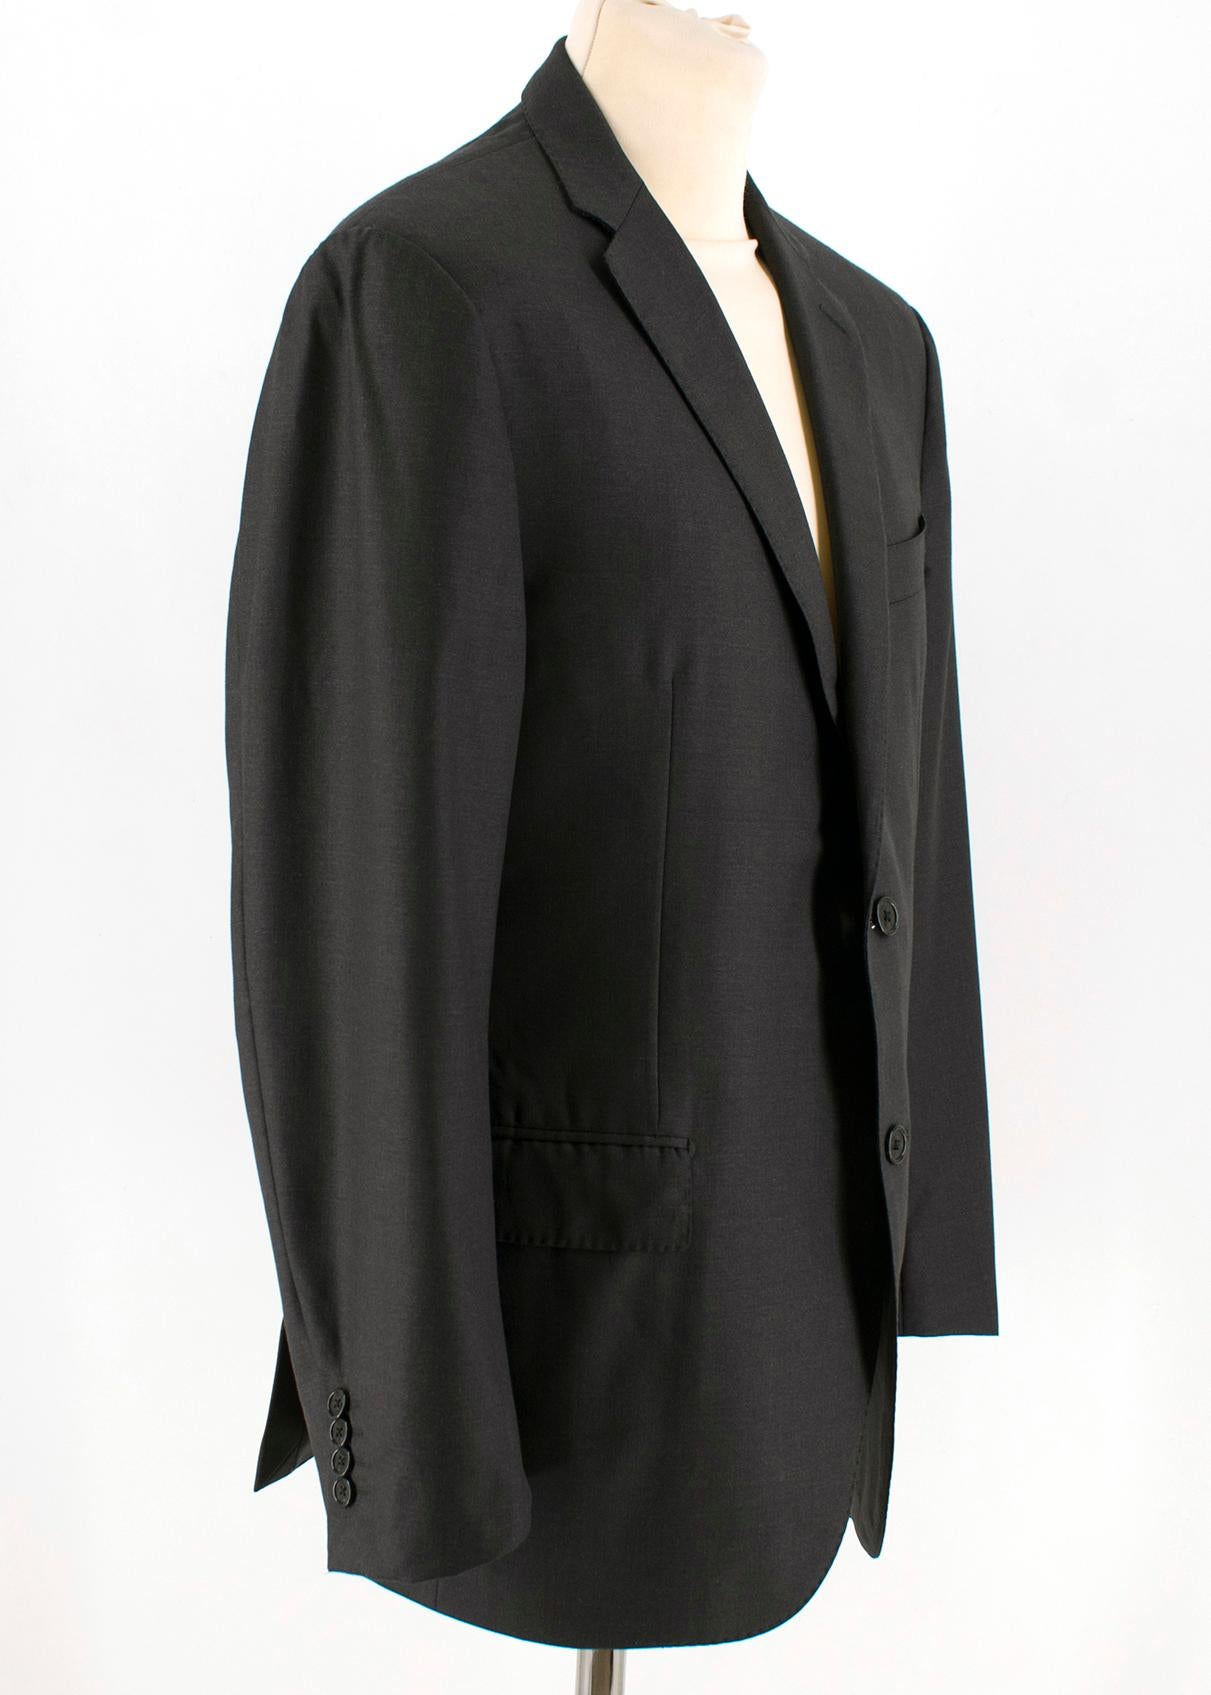 Corneliani Anthracite Grey Single Breasted Suit

Jacket:
- Single-breasted jacket
- Long sleeves
- Padded shoulders
- Button up cuffs
- Peak lapel collar
- Double back vent
- Two front flap pockets
- Chest welt pocket
- Three internal